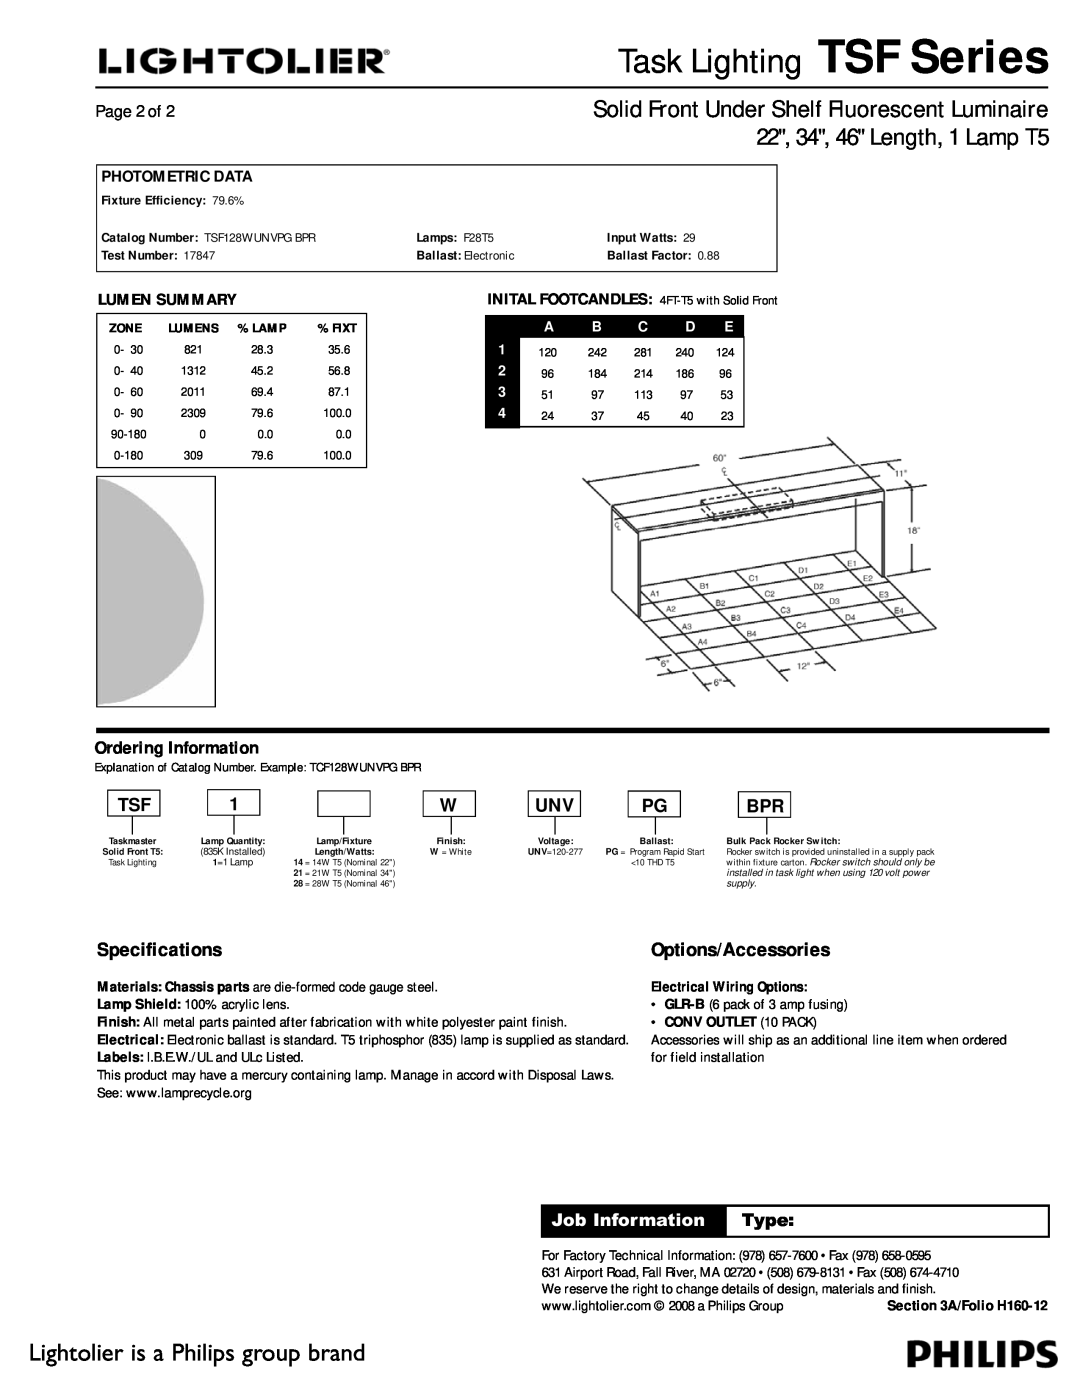 Lightolier TSF Series dimensions Ordering Information, Page 2 of, Photometric Data, Lumen Summary, Job Information Type 